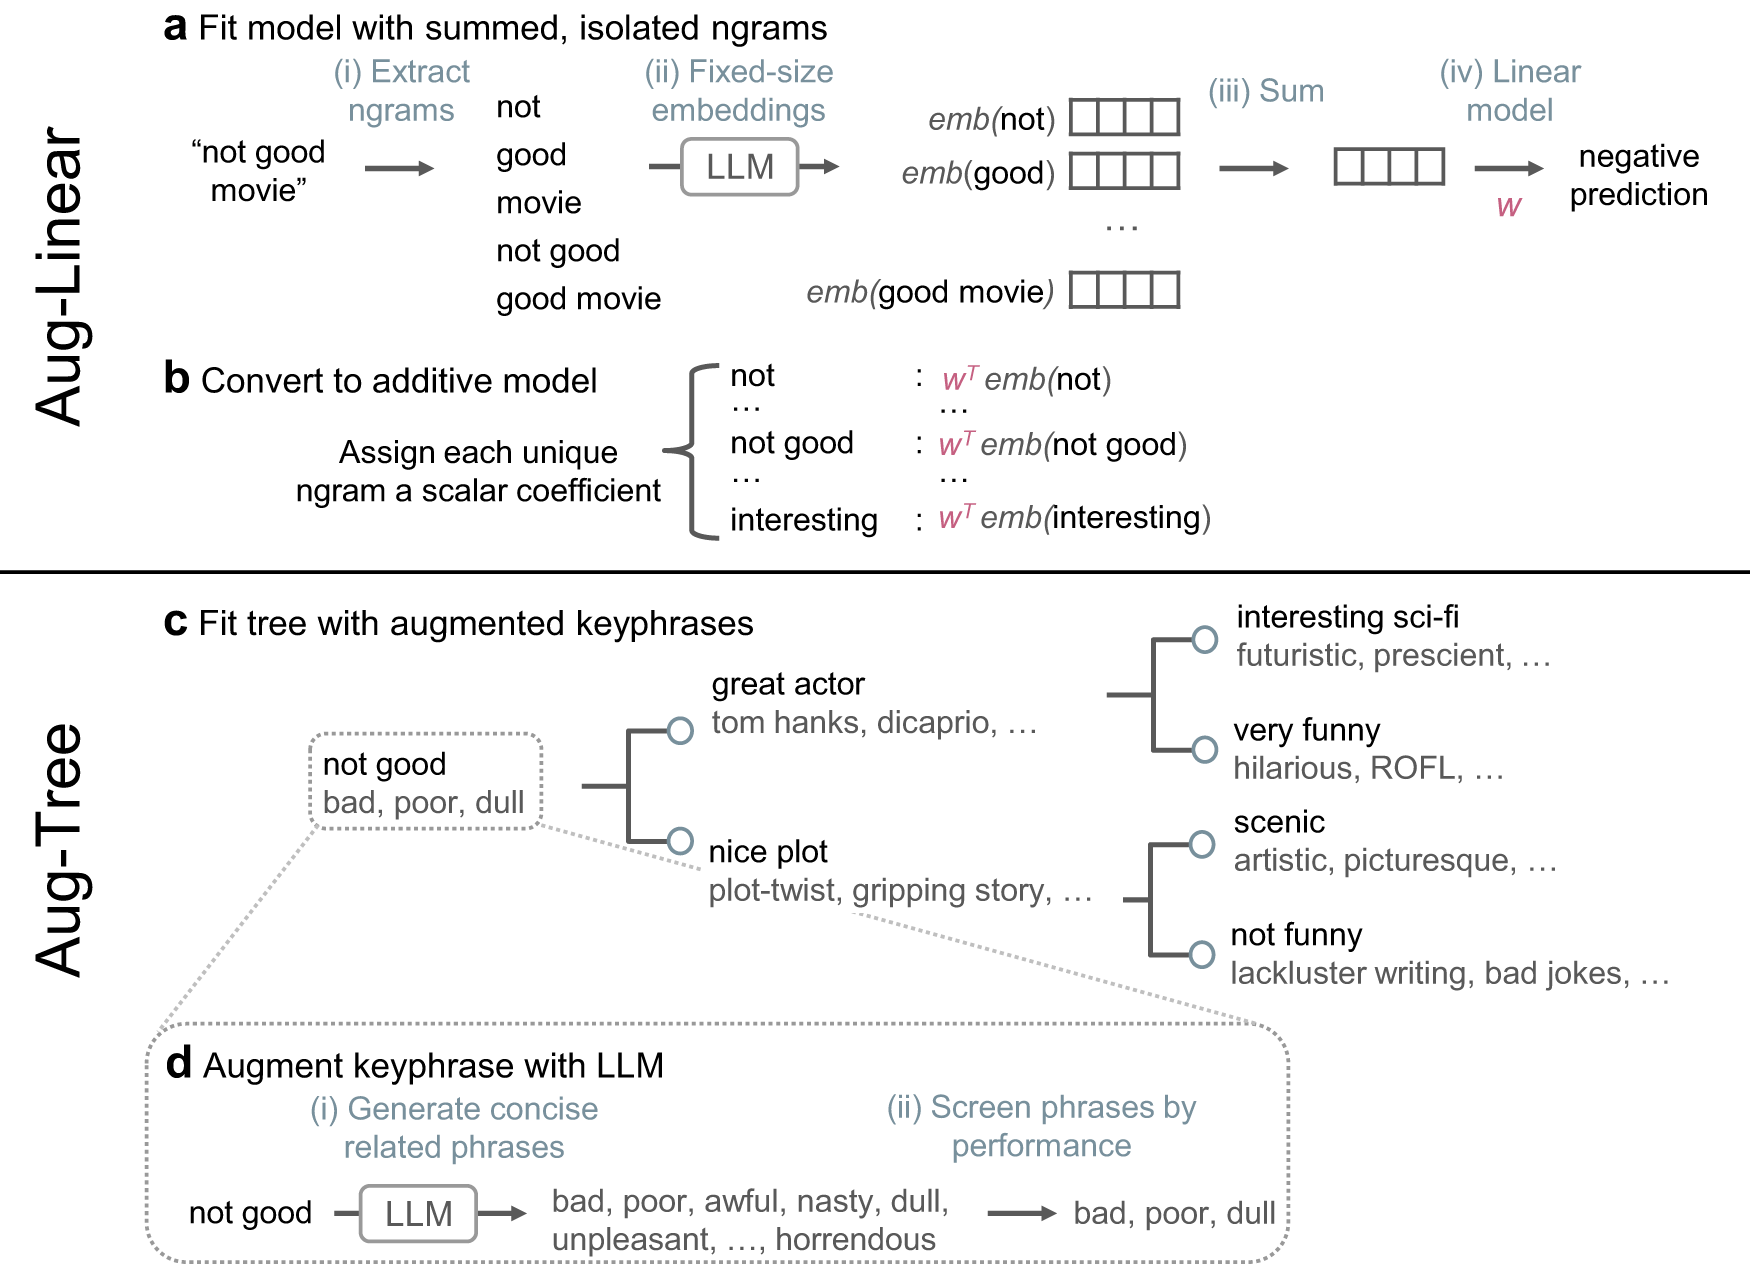 Figure 3.1 from Extraction of synonyms and semantically related